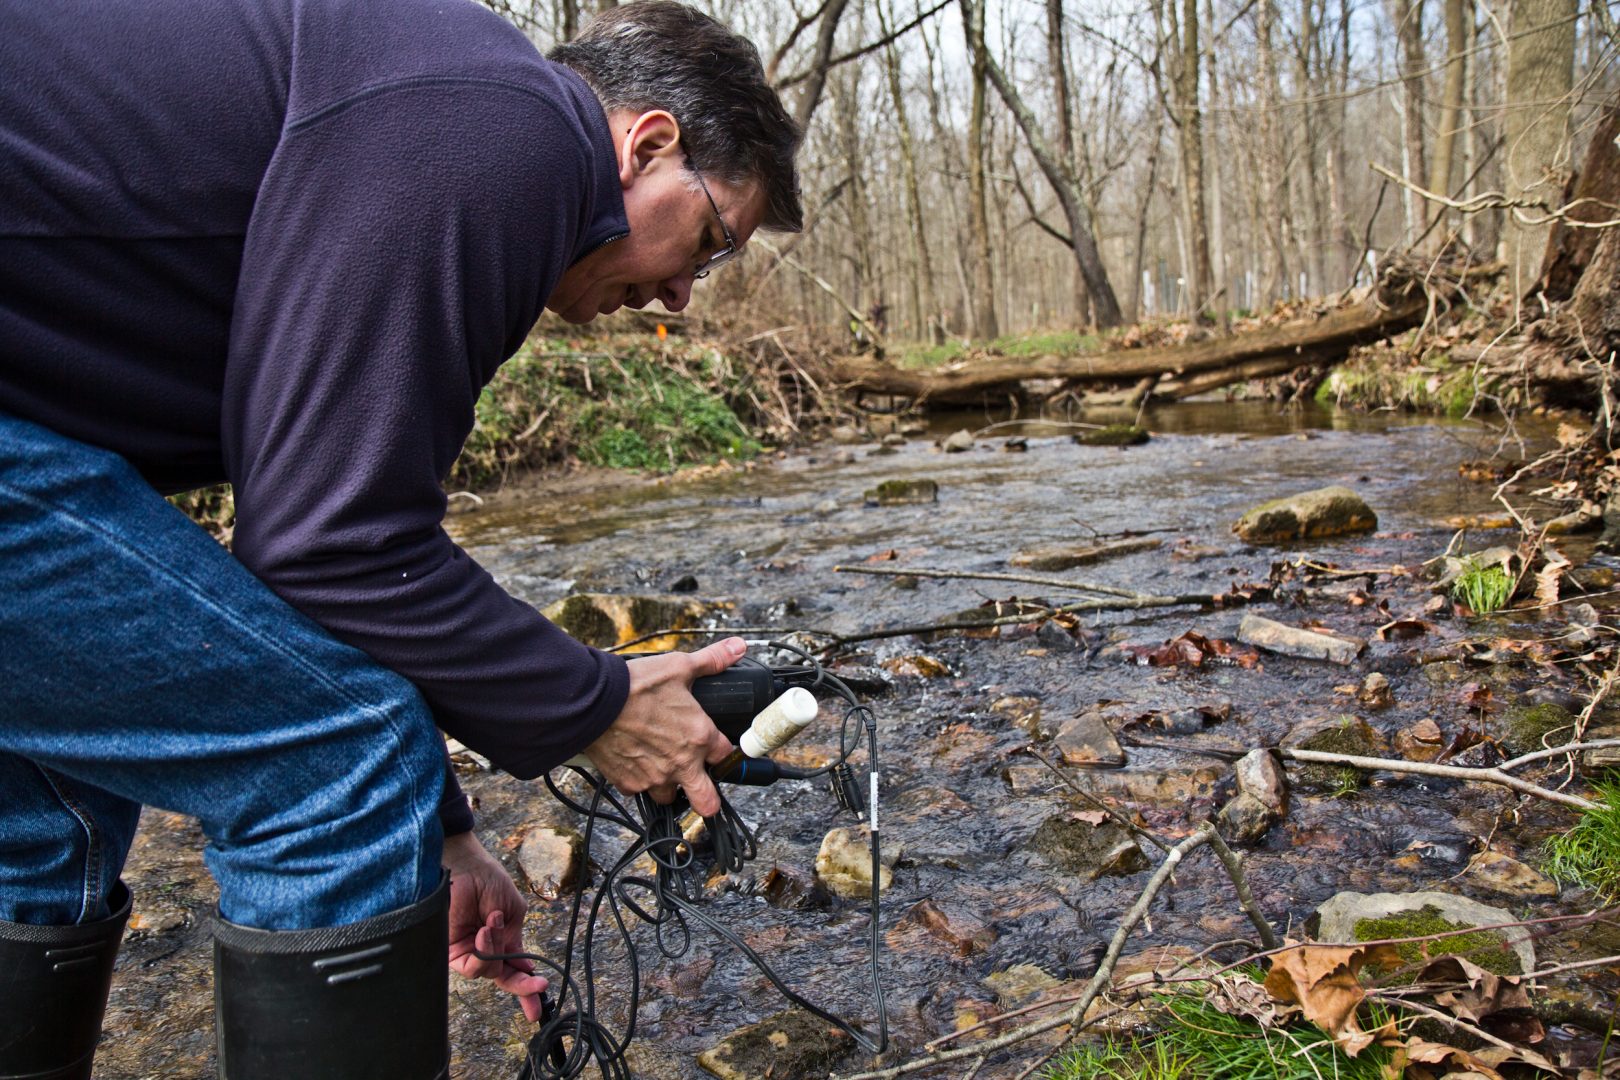 John Jackson, senior research scientist at the Stroud Water Research Center, measure conductivity in the White Clay Creek stream.